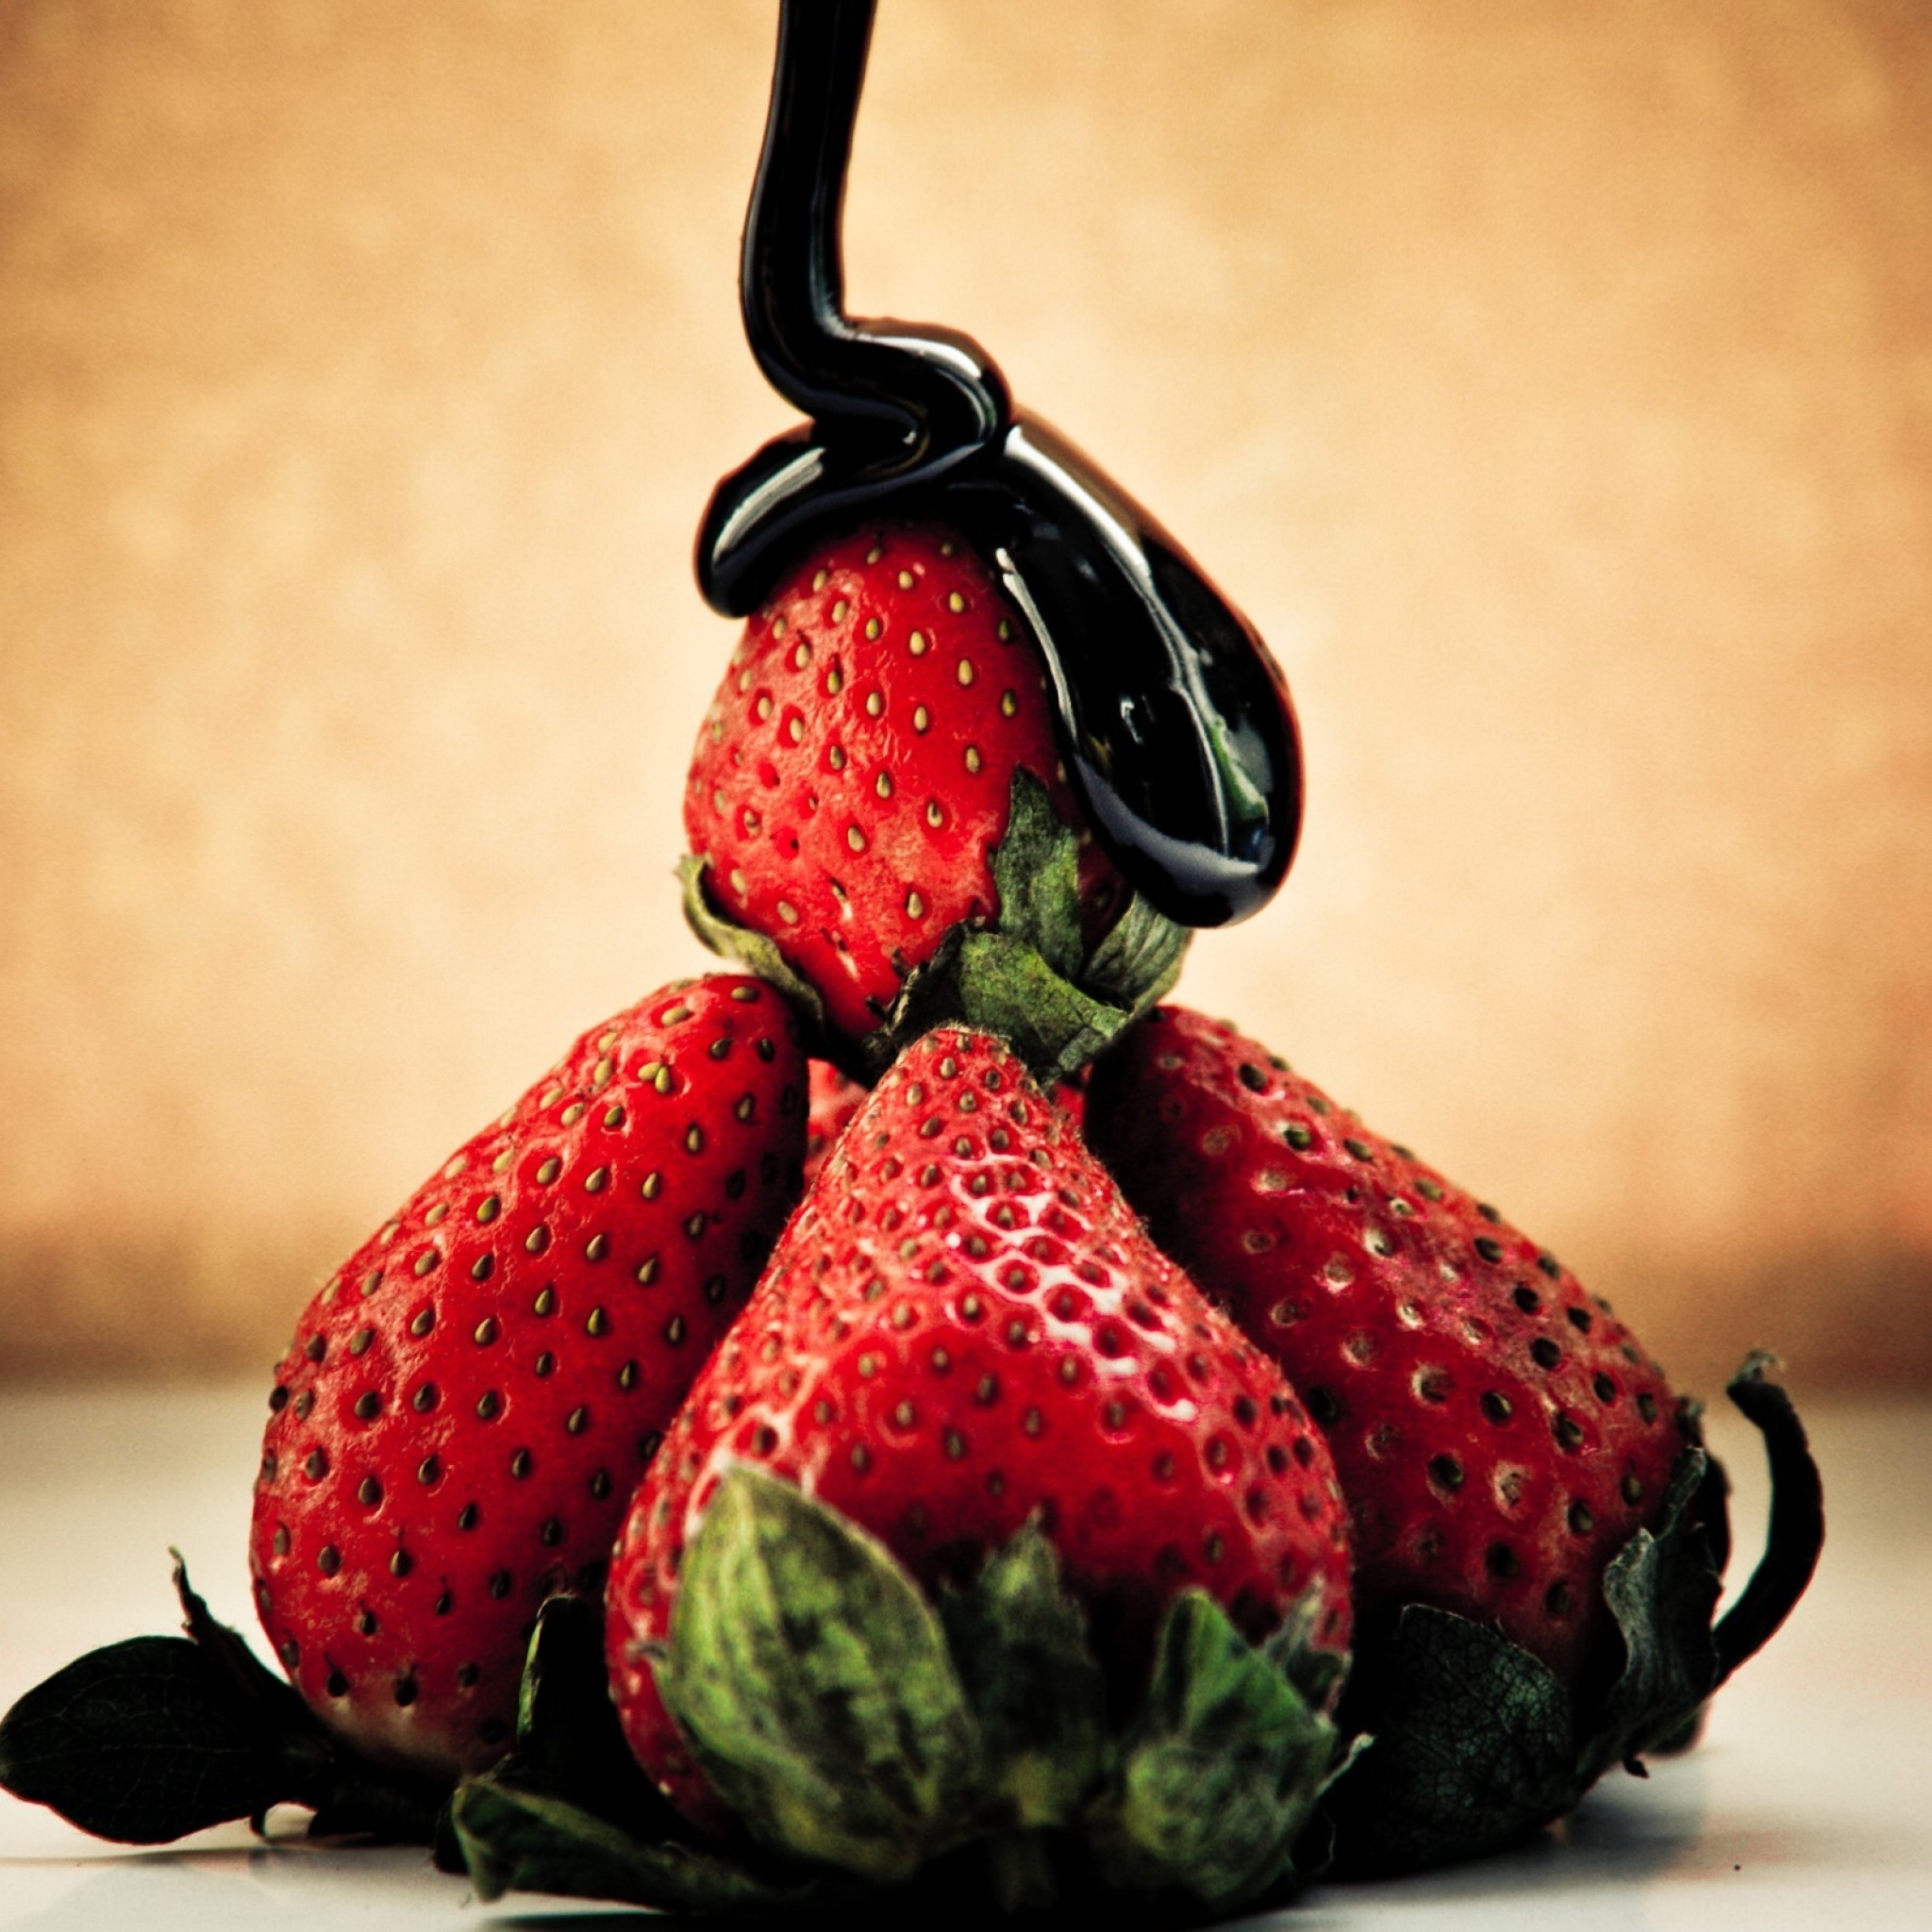 Das Strawberries with chocolate Wallpaper 2048x2048